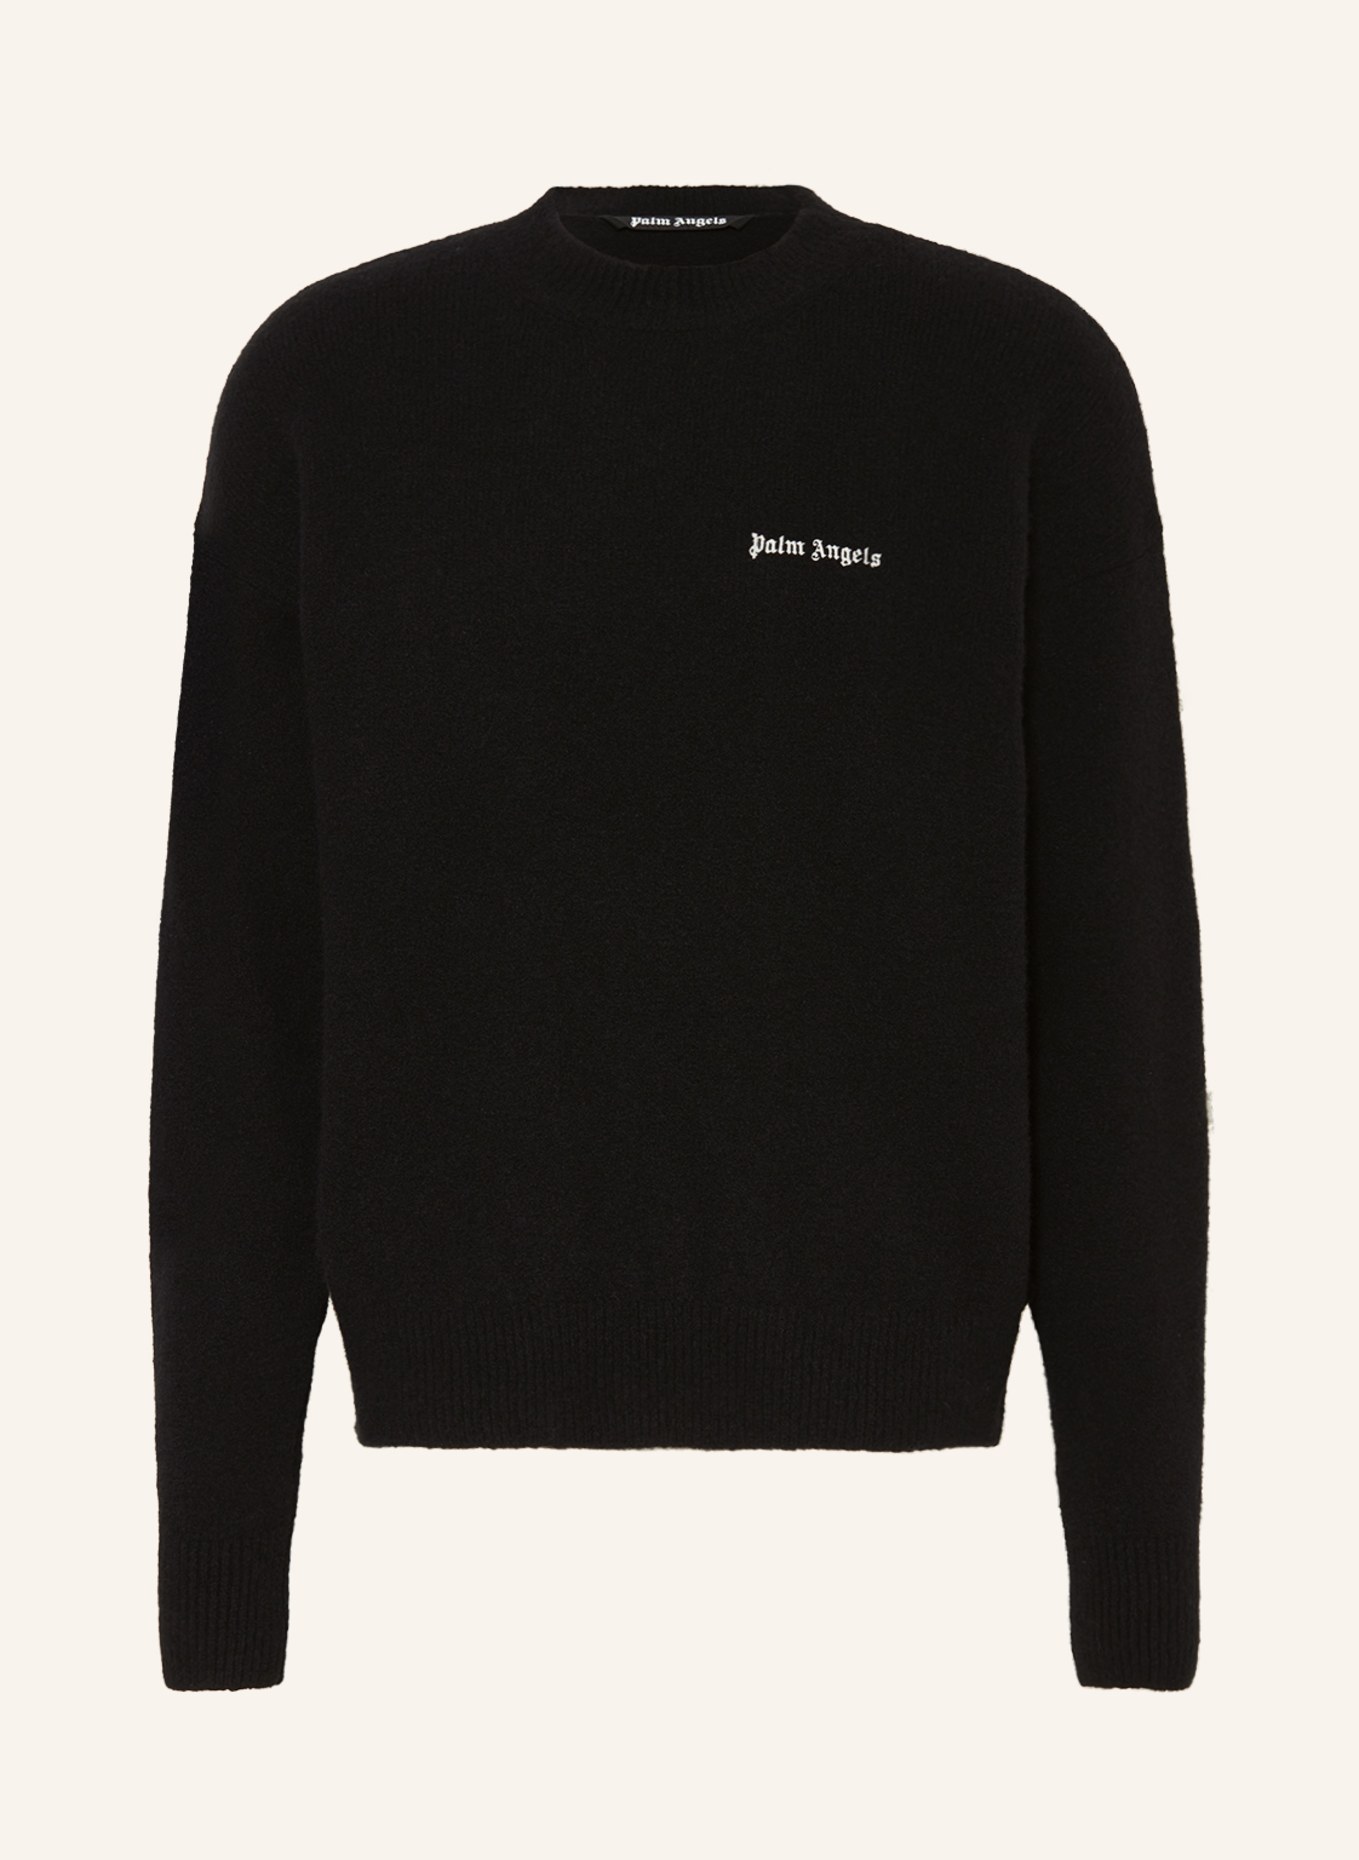 Palm Angels Sweater made of merino wool, Color: BLACK (Image 1)